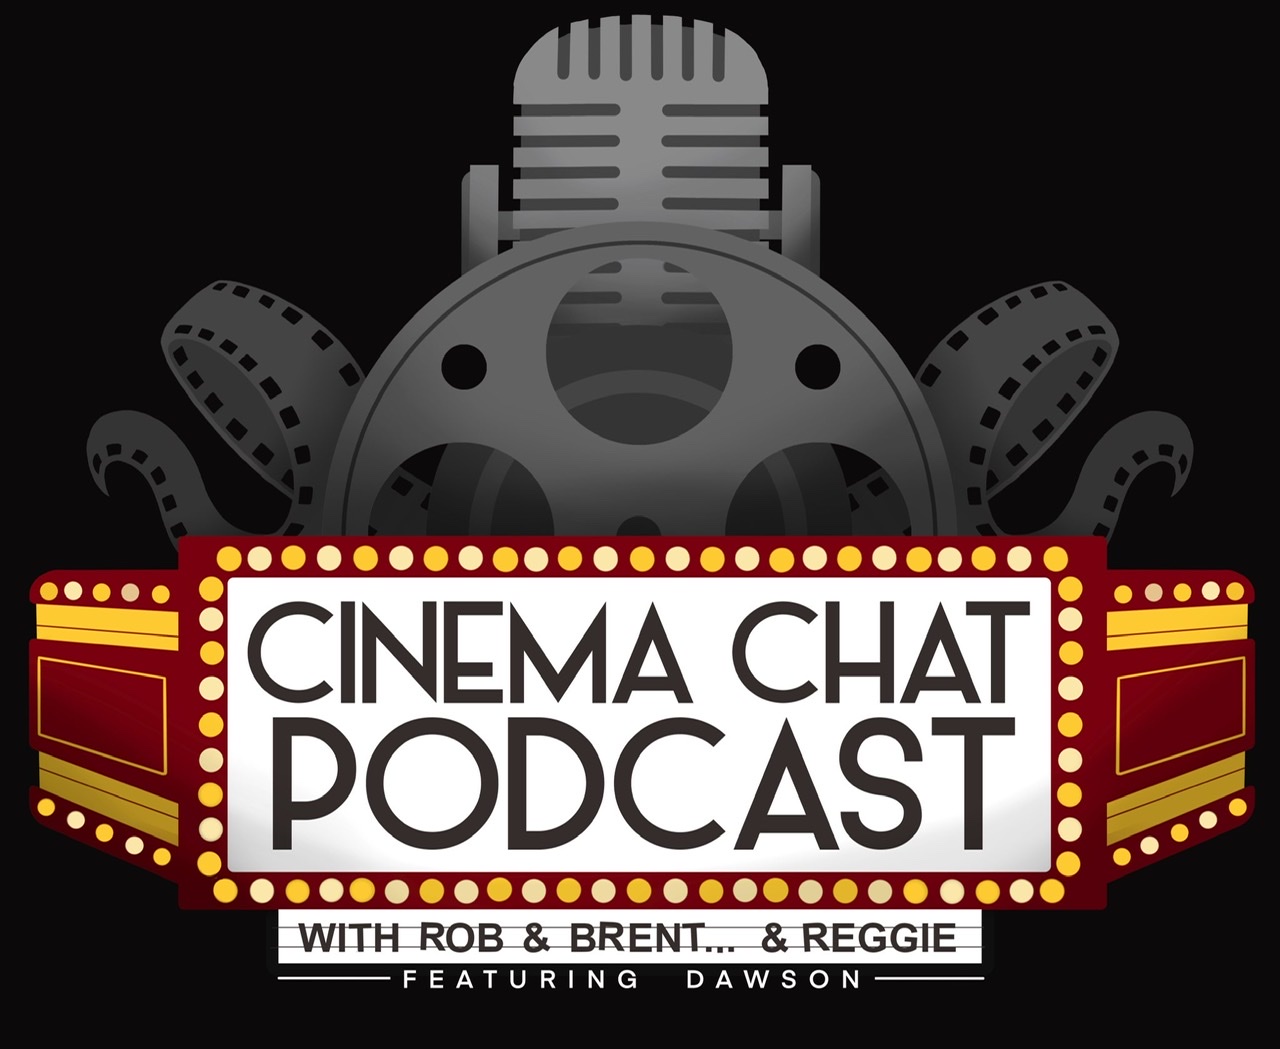 CinemaChat Podcast w/Rob & Brent…and Reggie